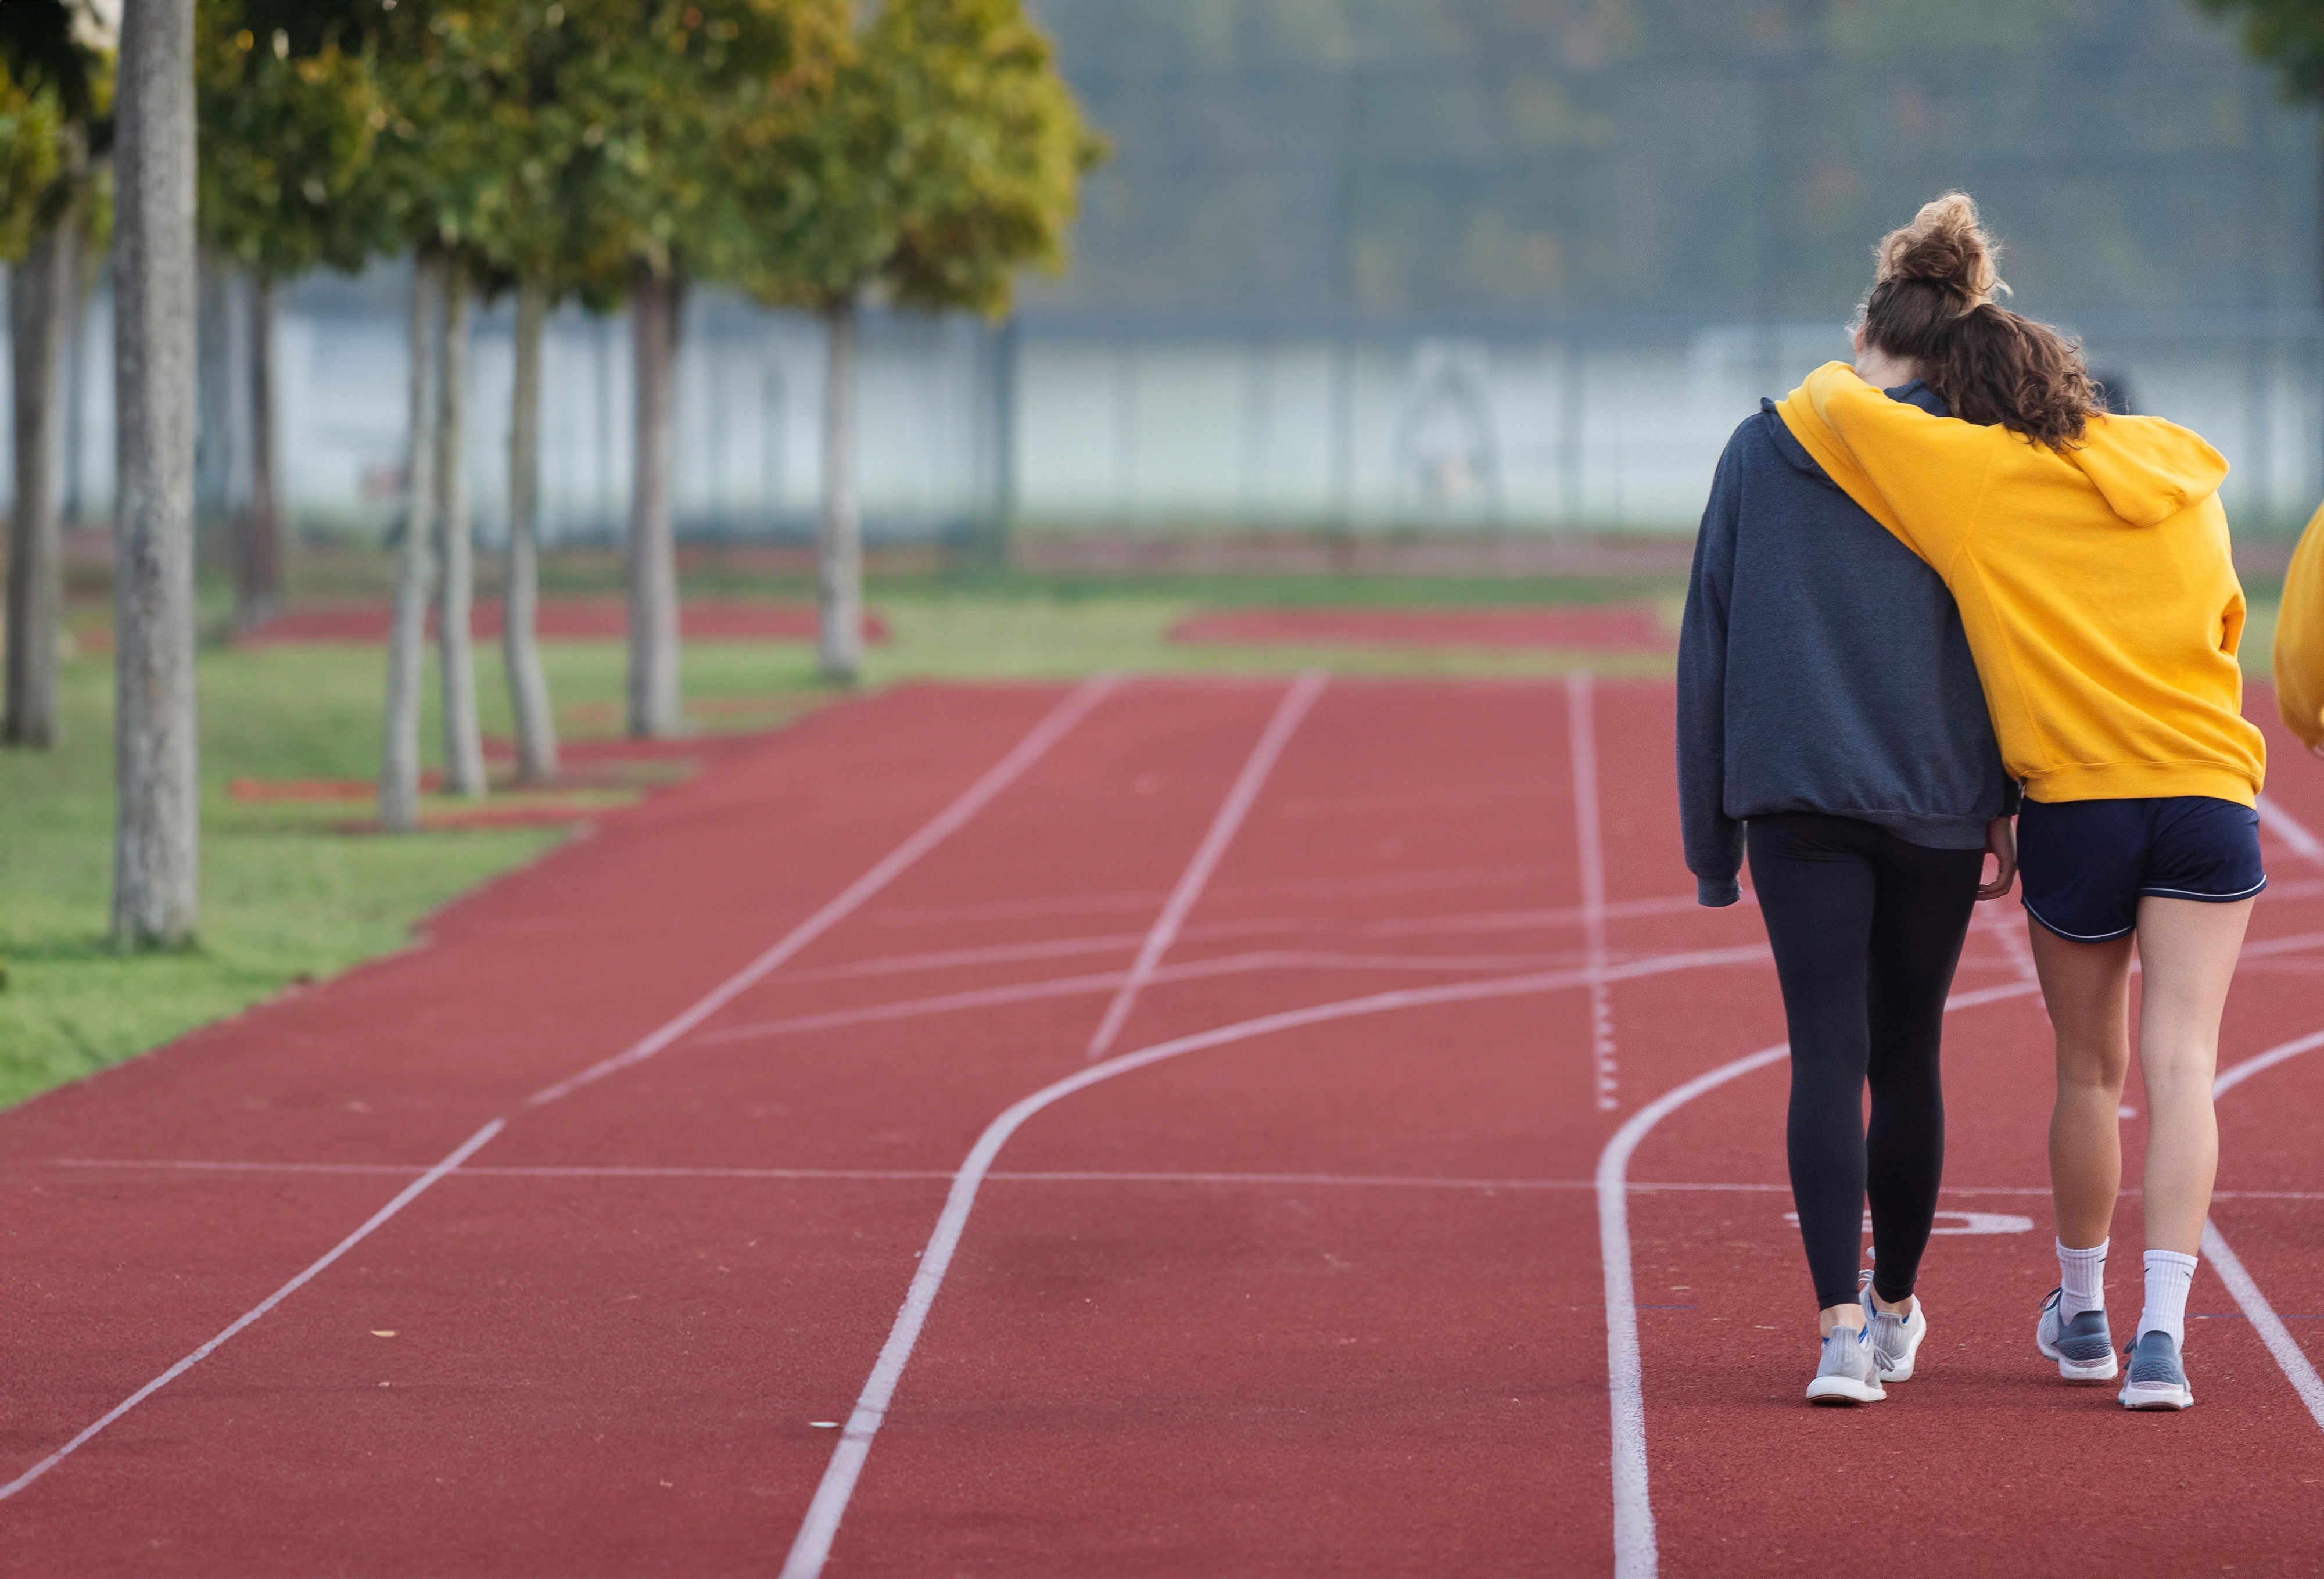 Two individuals stand on a track, holding each other in support while walking away from the camera.